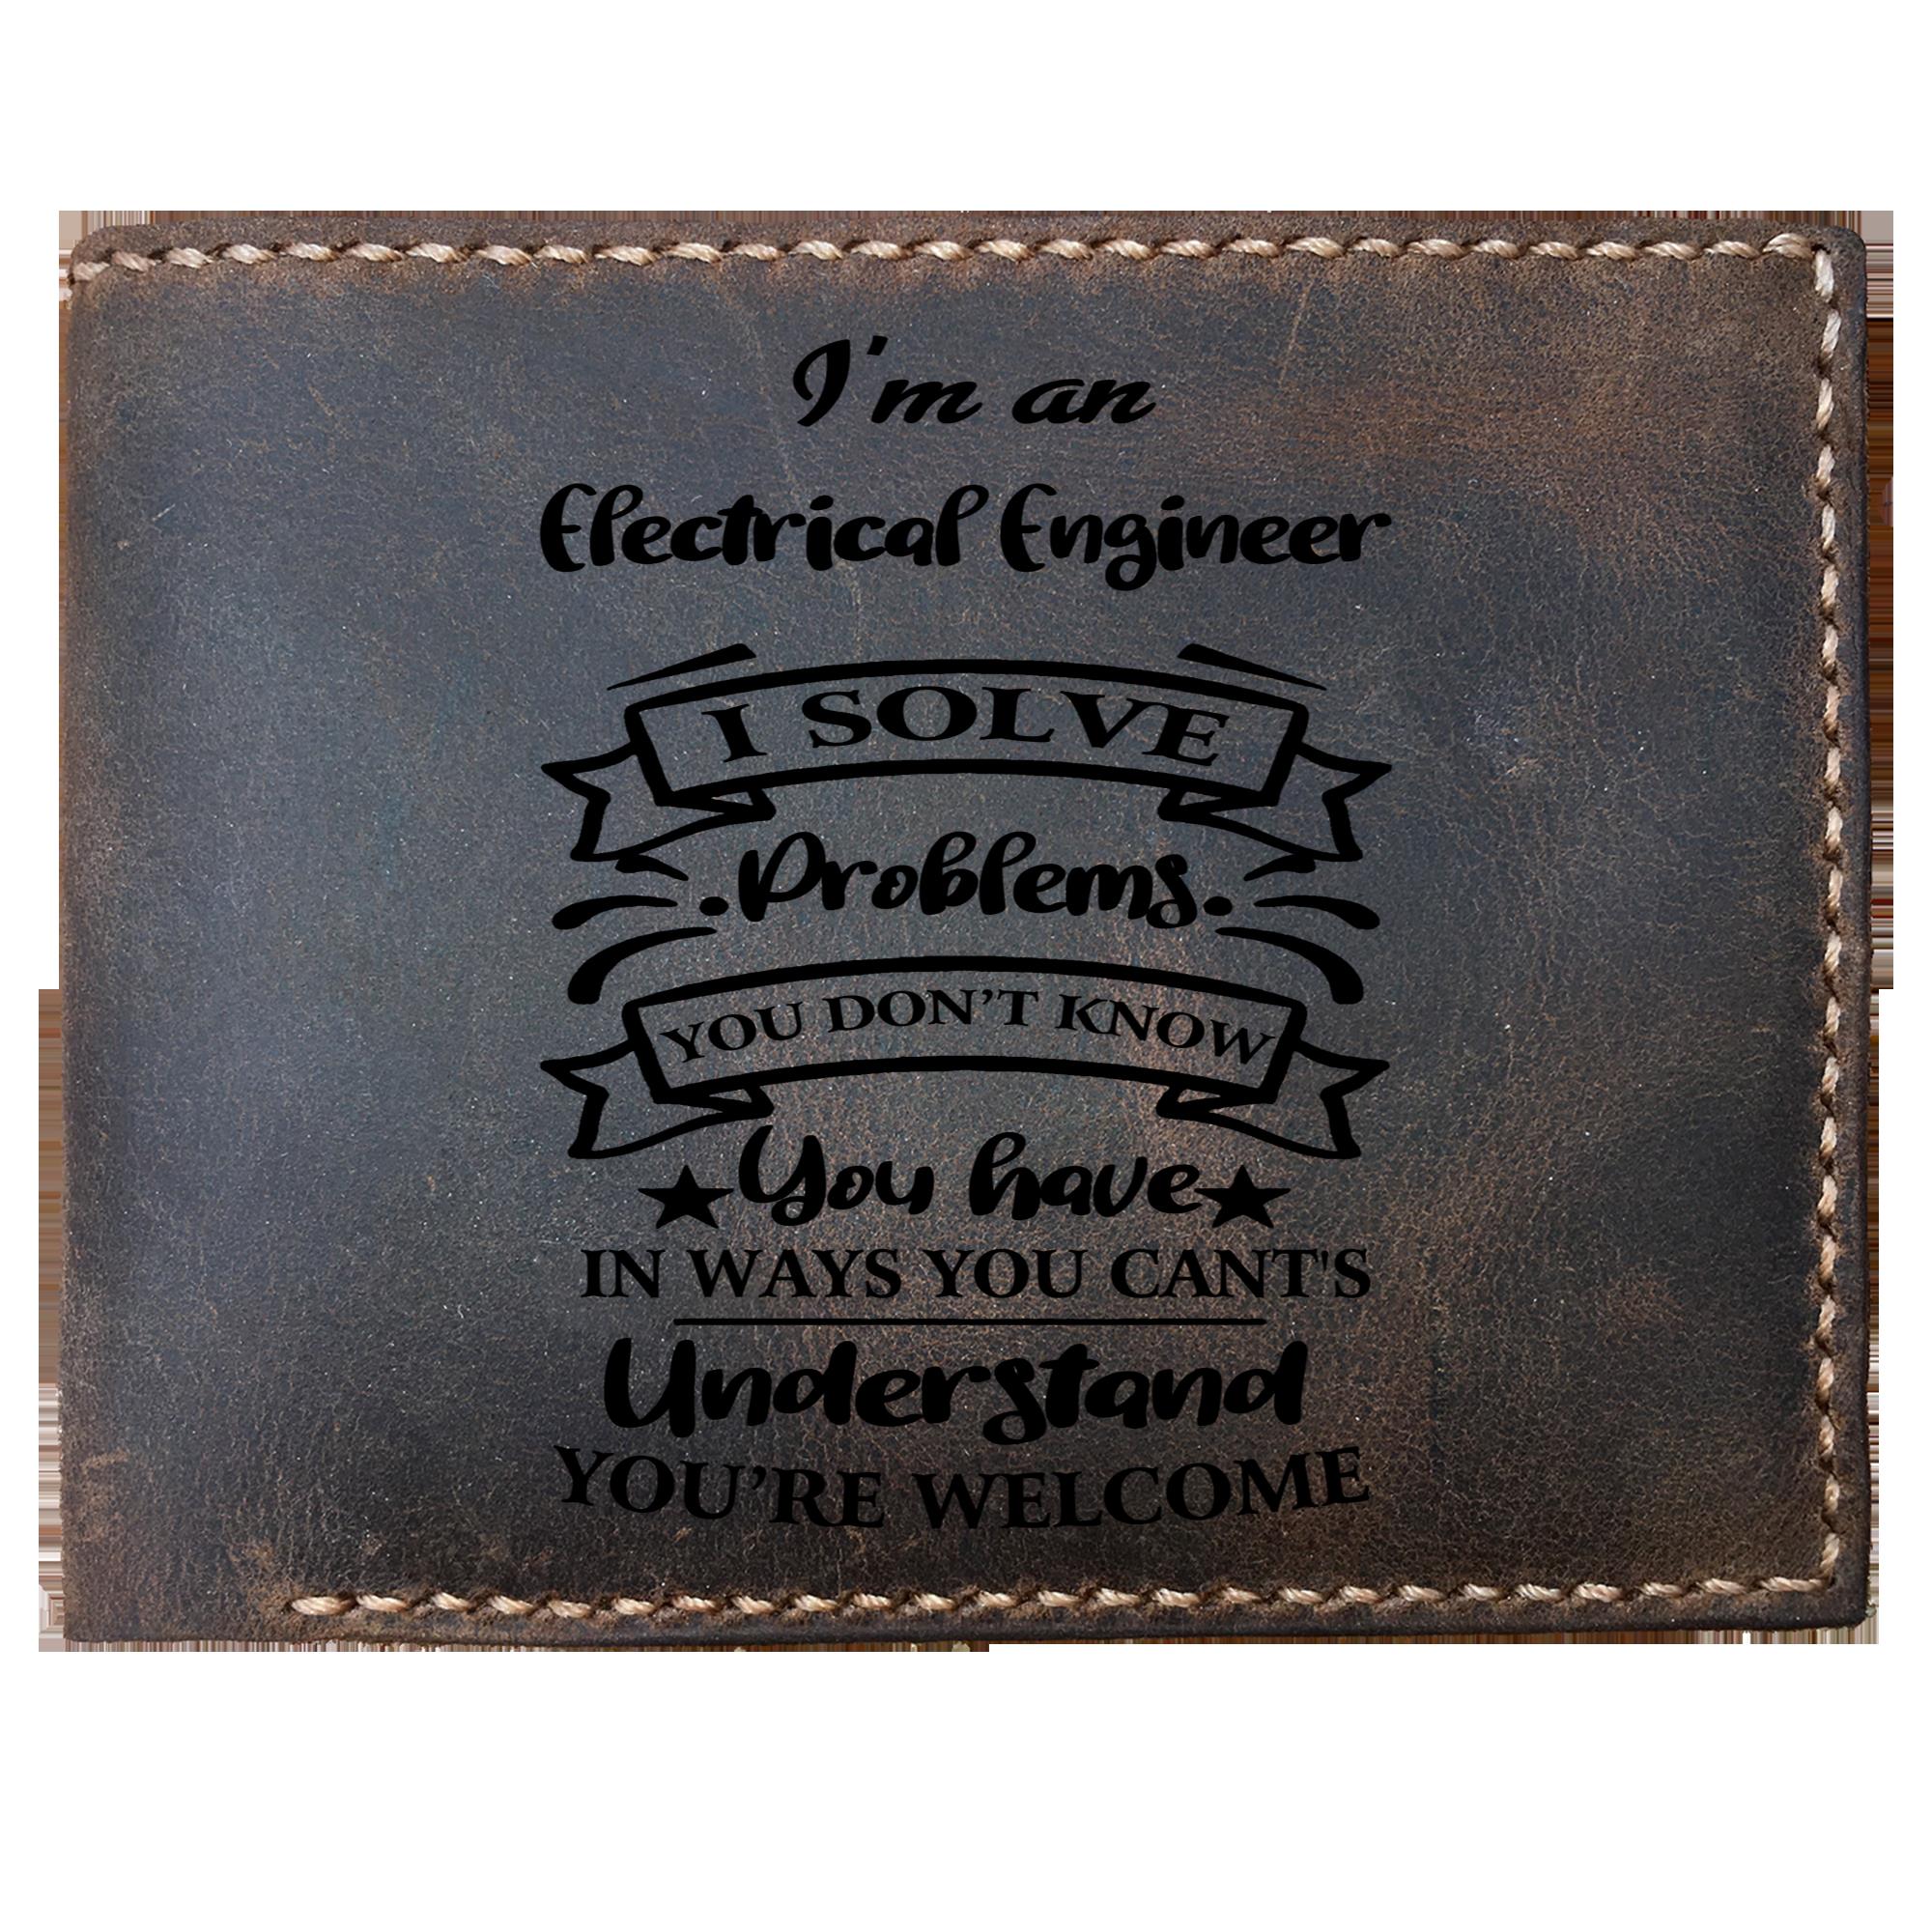 Skitongifts Funny Custom Laser Engraved Bifold Leather Wallet For Men, I'm an Electrical Engineer Solve Problems, Father's Day Gifts